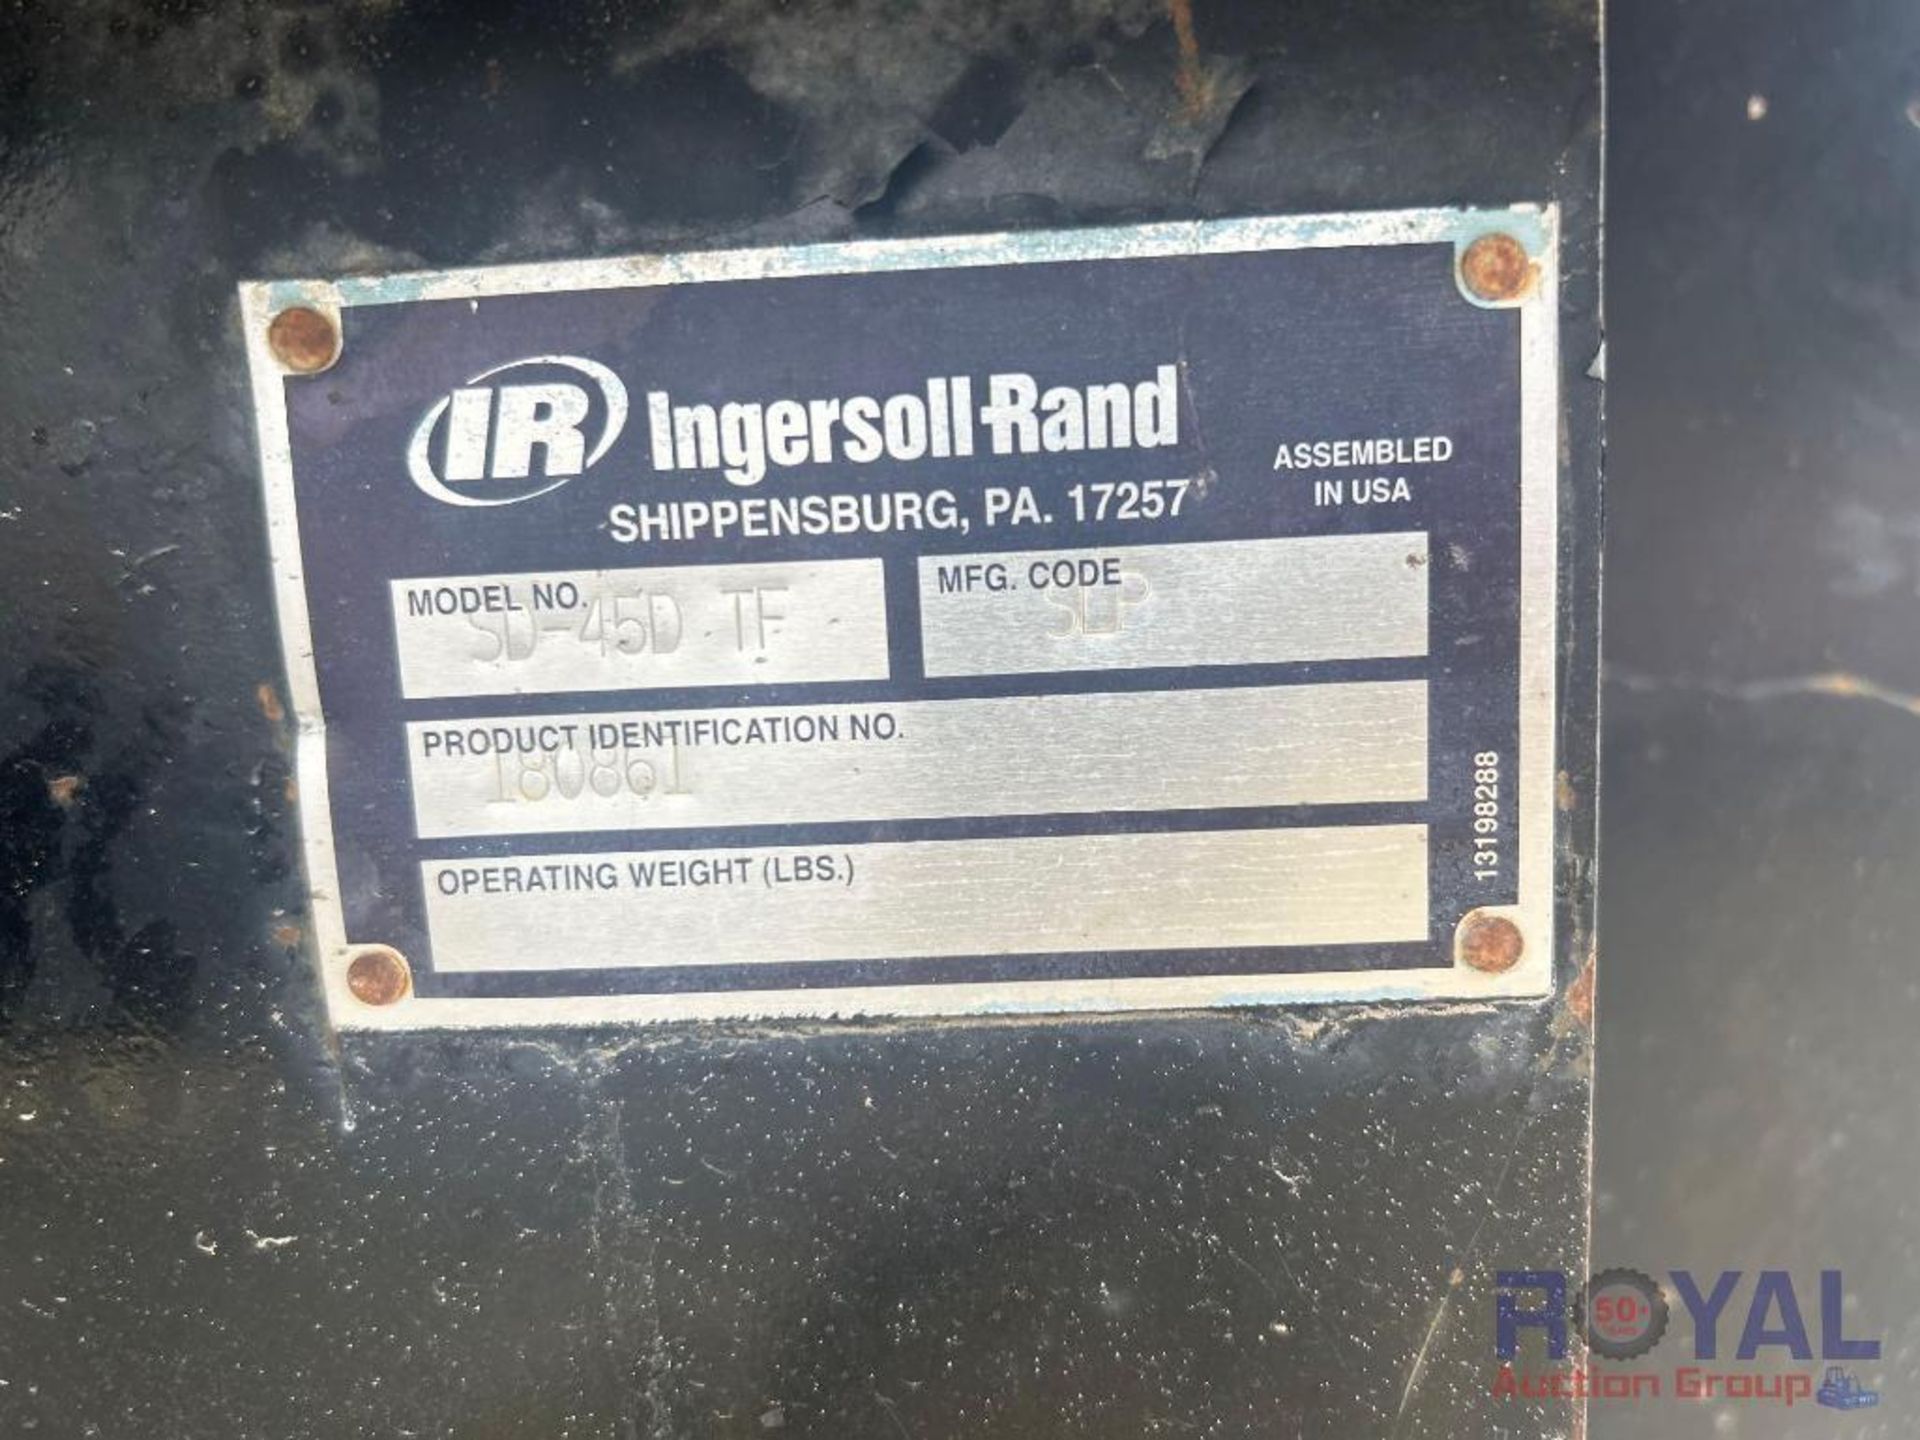 Ingersoll Rand SD-45D-TF 54in Vibratory Smooth Drum Roller - Image 5 of 21